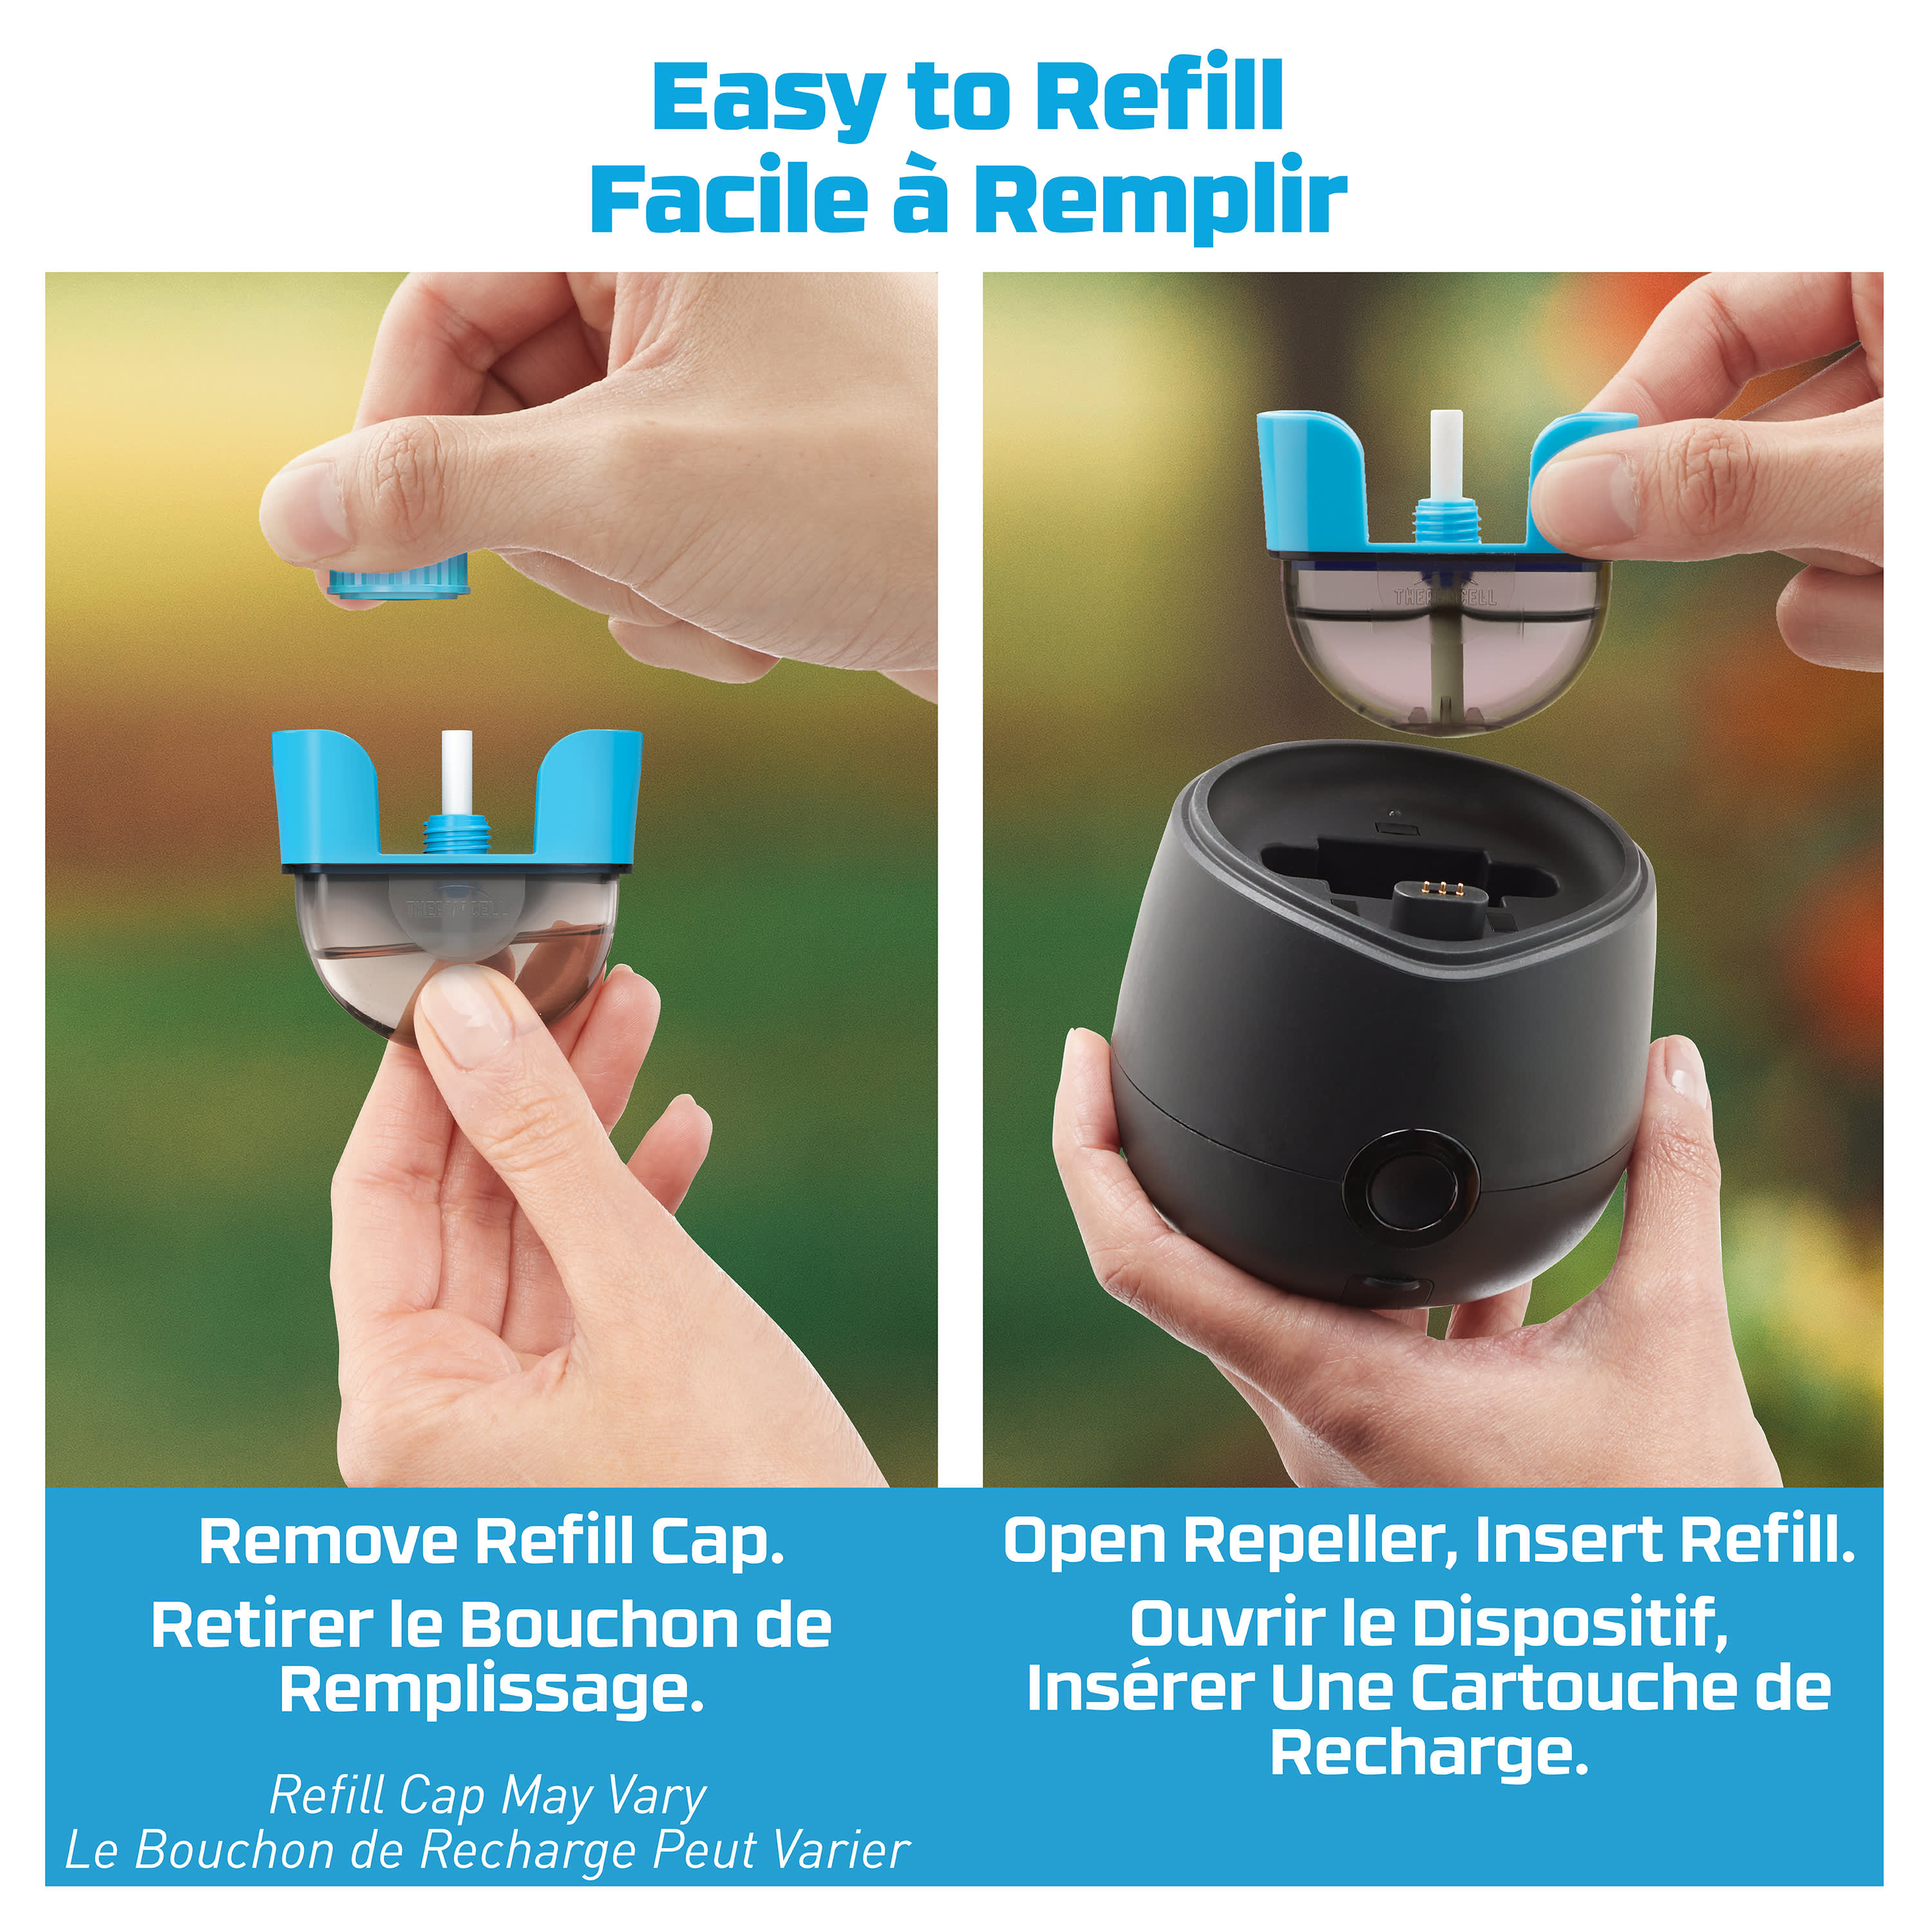 ThermaCELL® Rechargeable Refills - 72 Hours